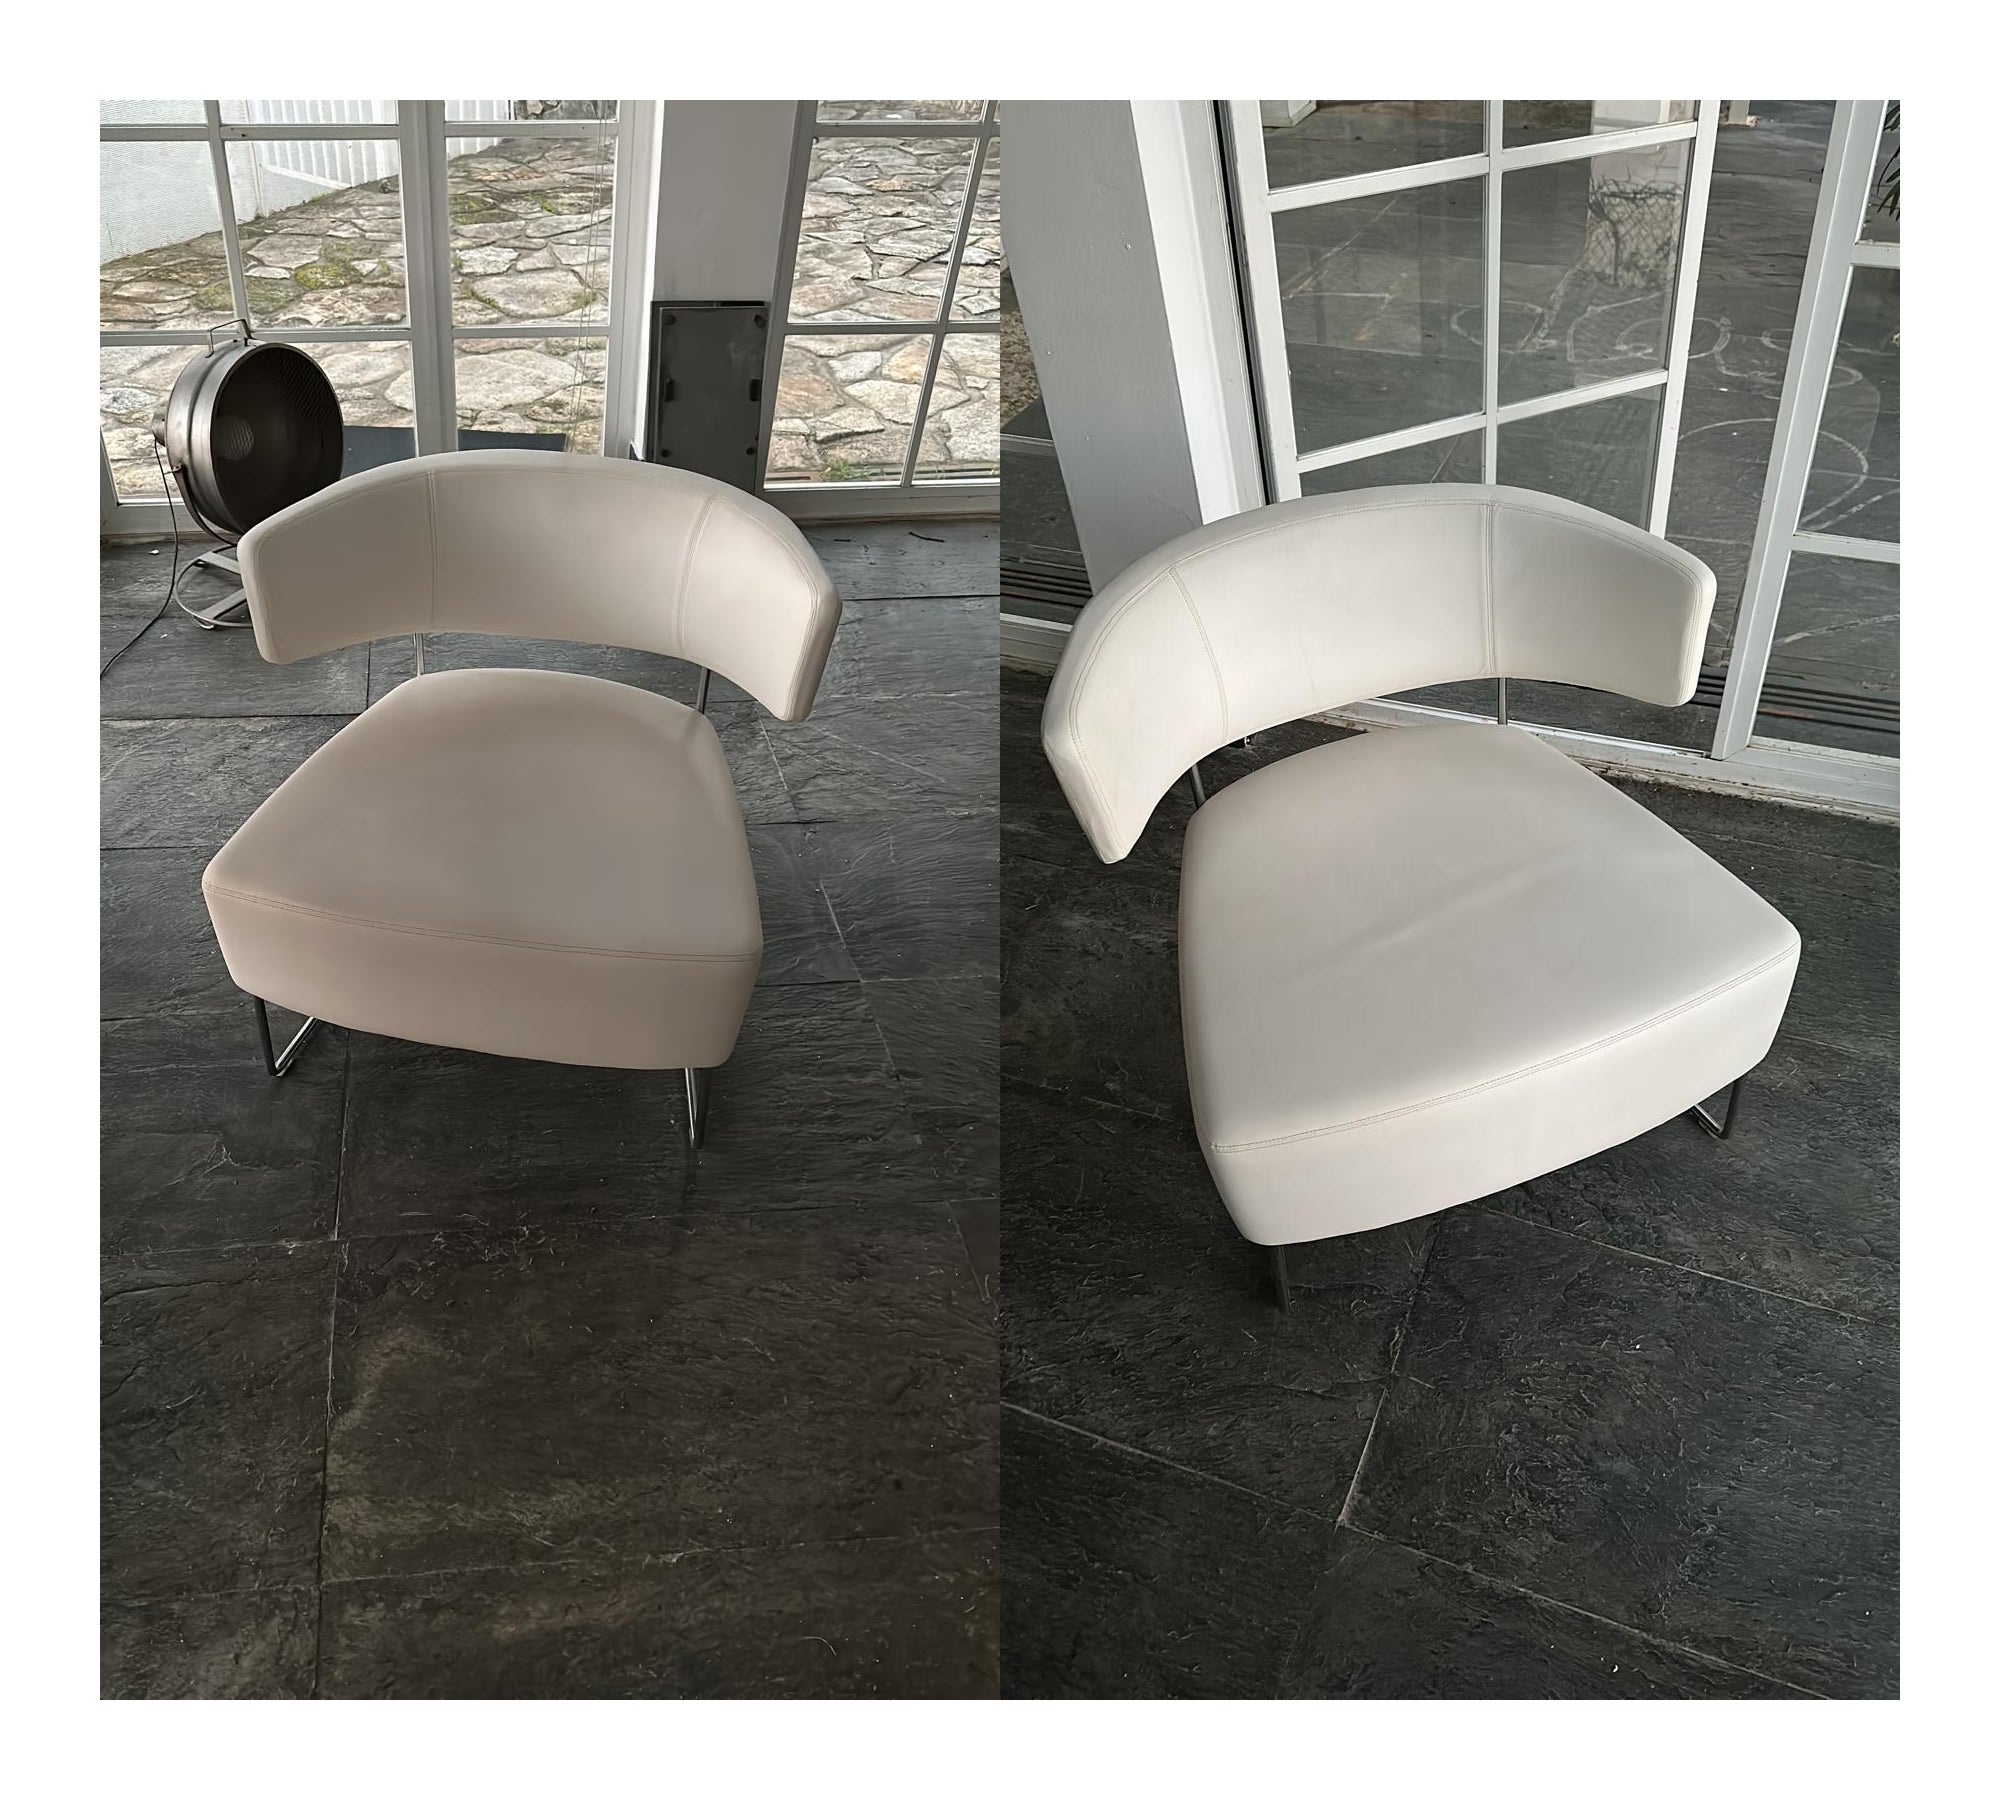 Andreu World

Andreu World
Taurus BU4201

Pair of Armchair with upholstered seat and back and steel sled base in white gloss chrome finish

H backrest: 68cm
H seat : 41,5cm
H arm : 68cm
H Width: 74cm
Depth: 75cm

Conditions: NEW